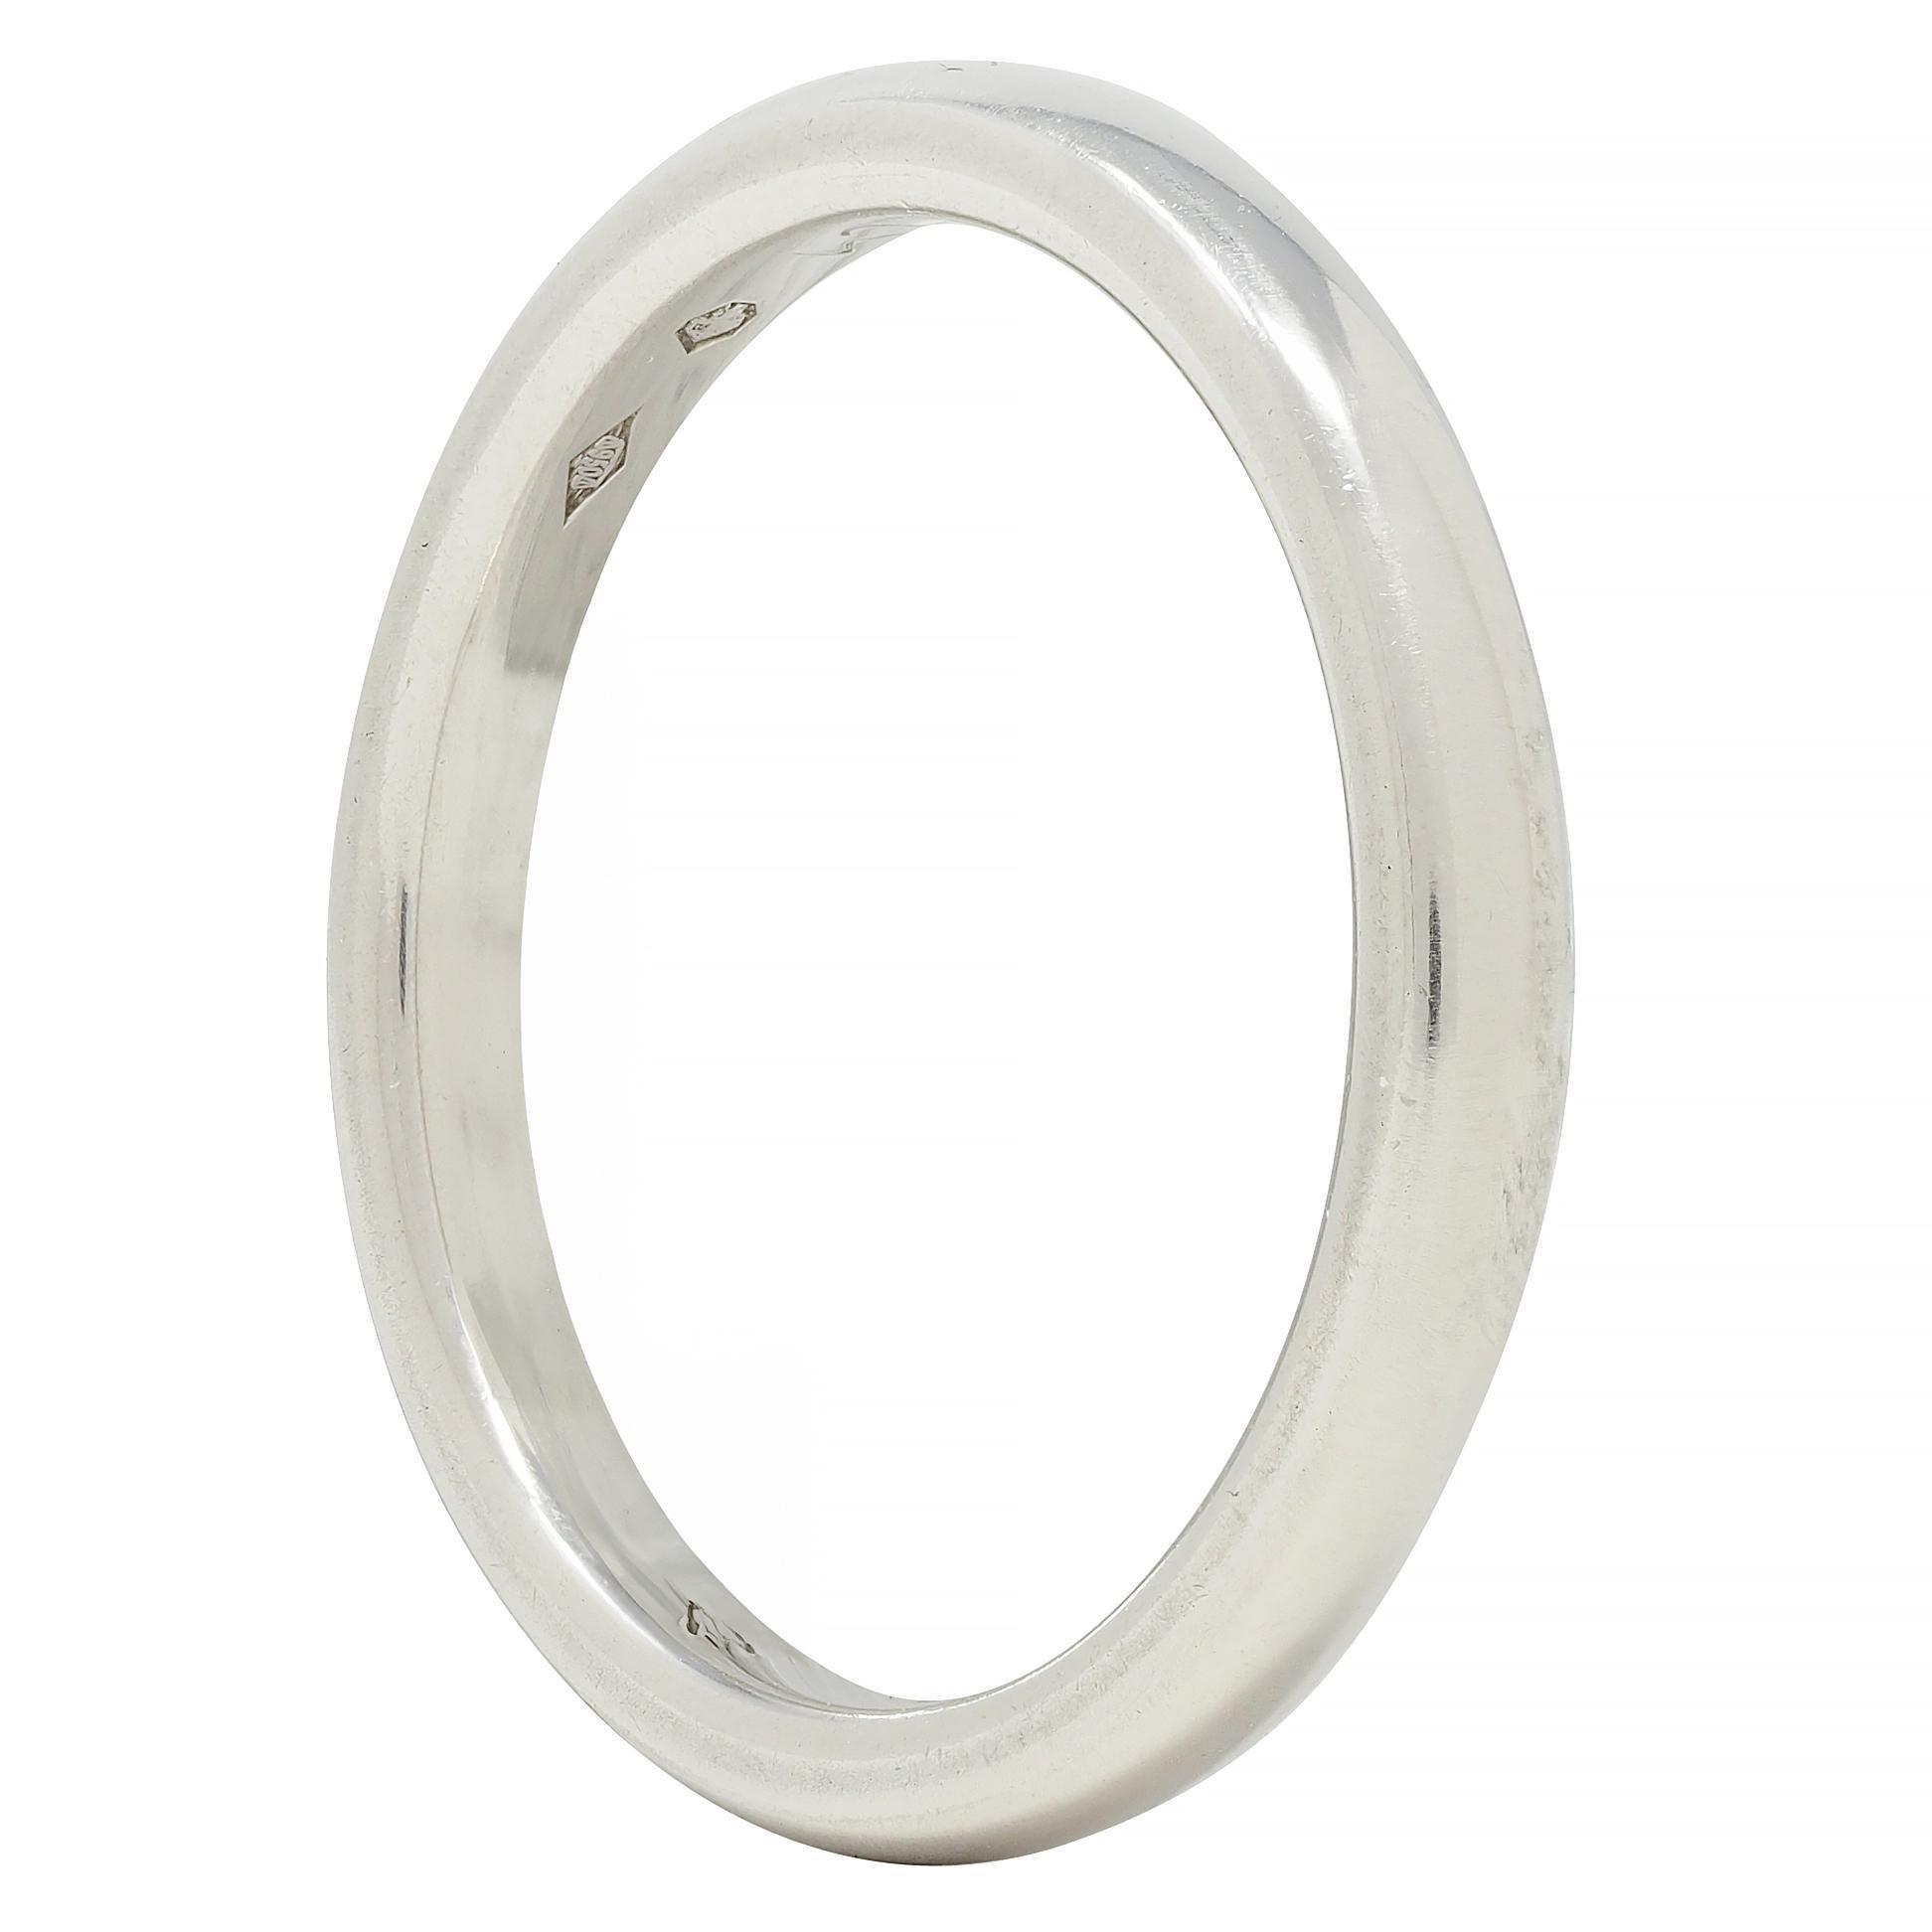 Designed as a curved platinum band
With high polish finish
Stamped with Swiss hallmarks for platinum
Numbered and signed for Van Cleef & Arpels
Circa: 2000s
Ring size: 6 1/2
Measures north to south 2.5 mm and sits 2.0 mm high
Total weight: 5.1 grams